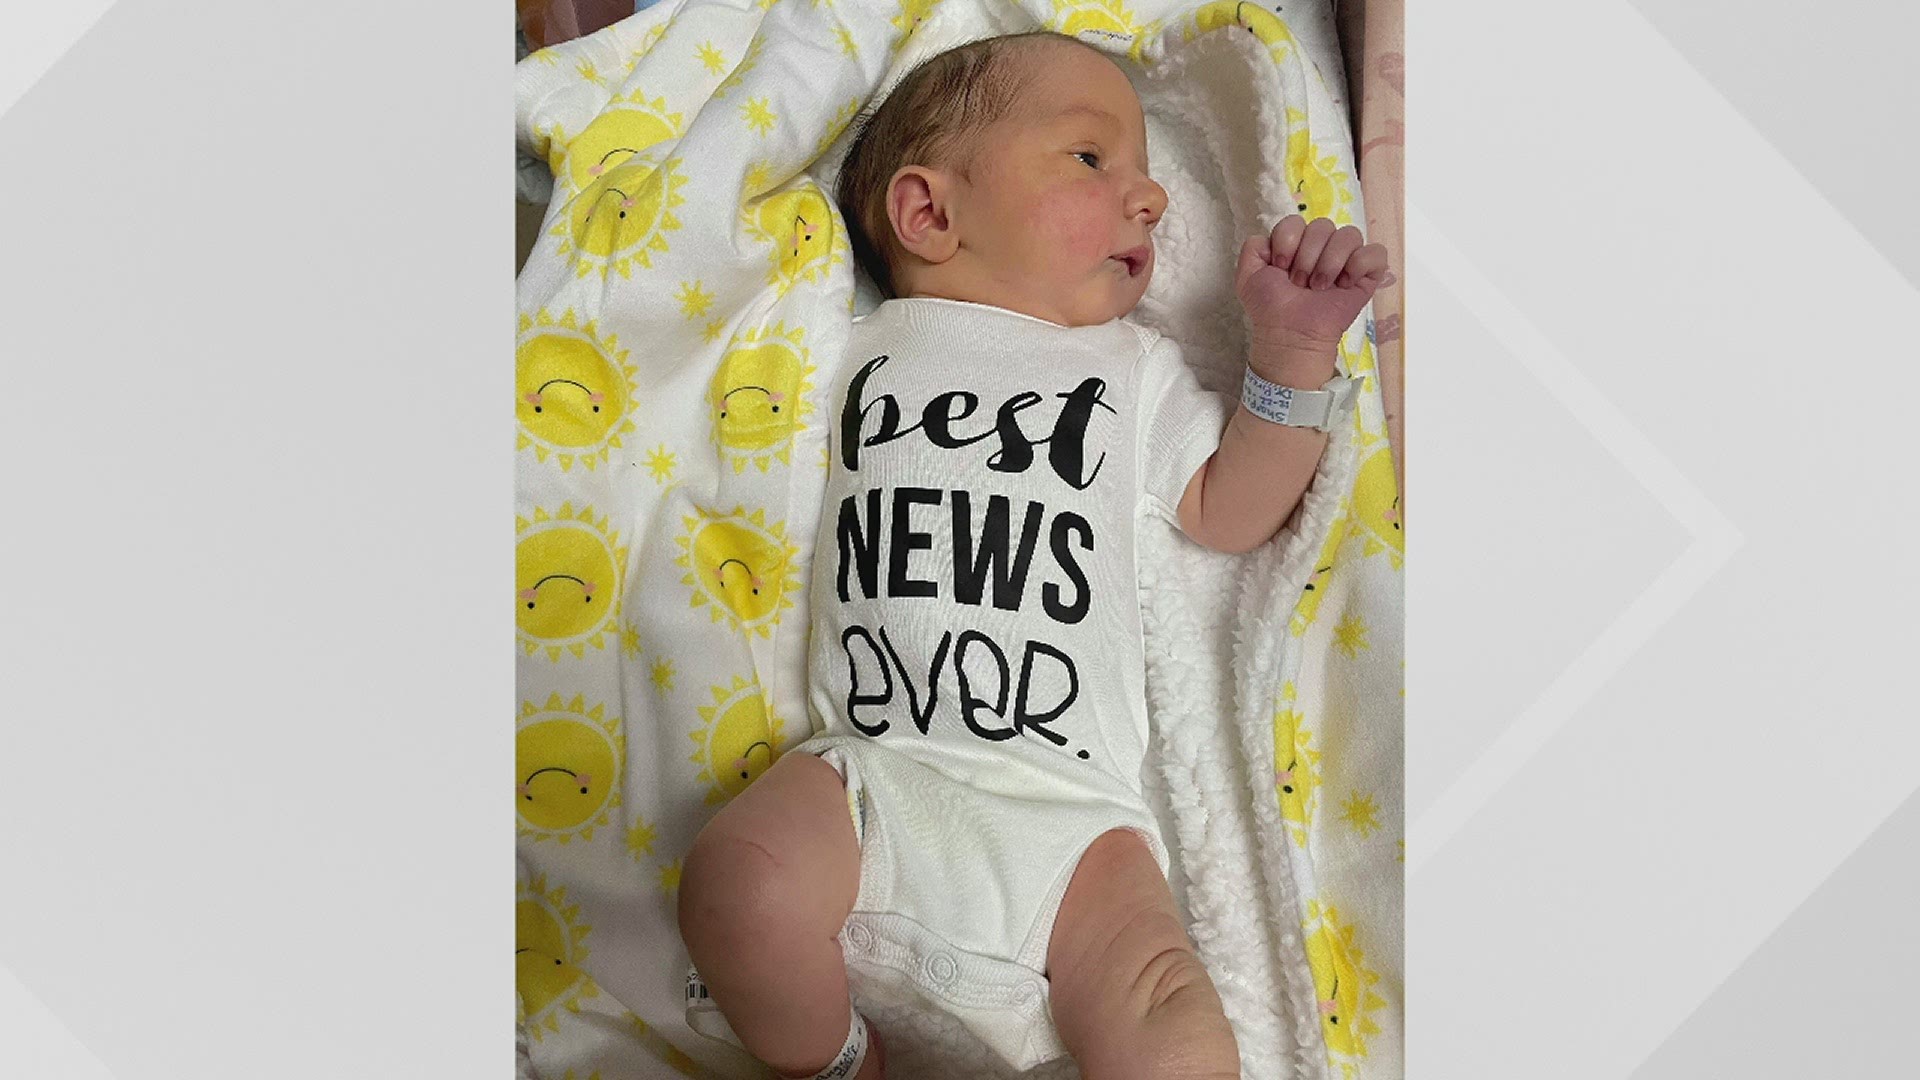 GMQC anchor Angie Sharp welcomed a new member to her family on Dec. 22, 2020!